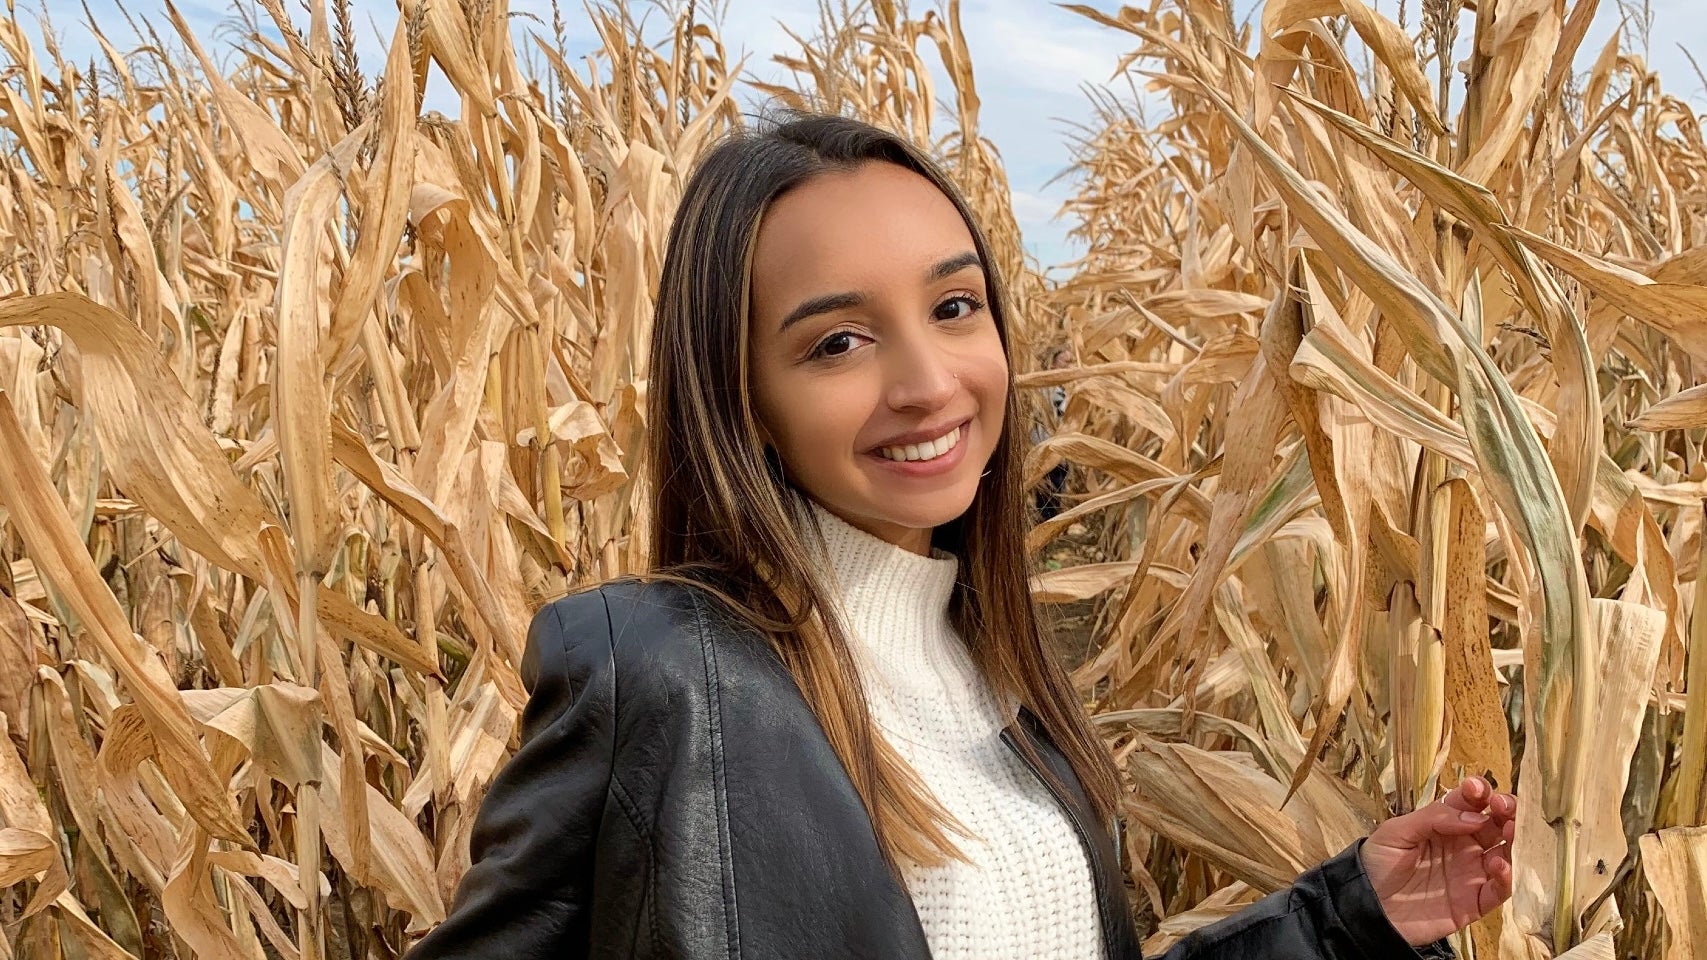 A photo of Sarina smiling in a corn field.